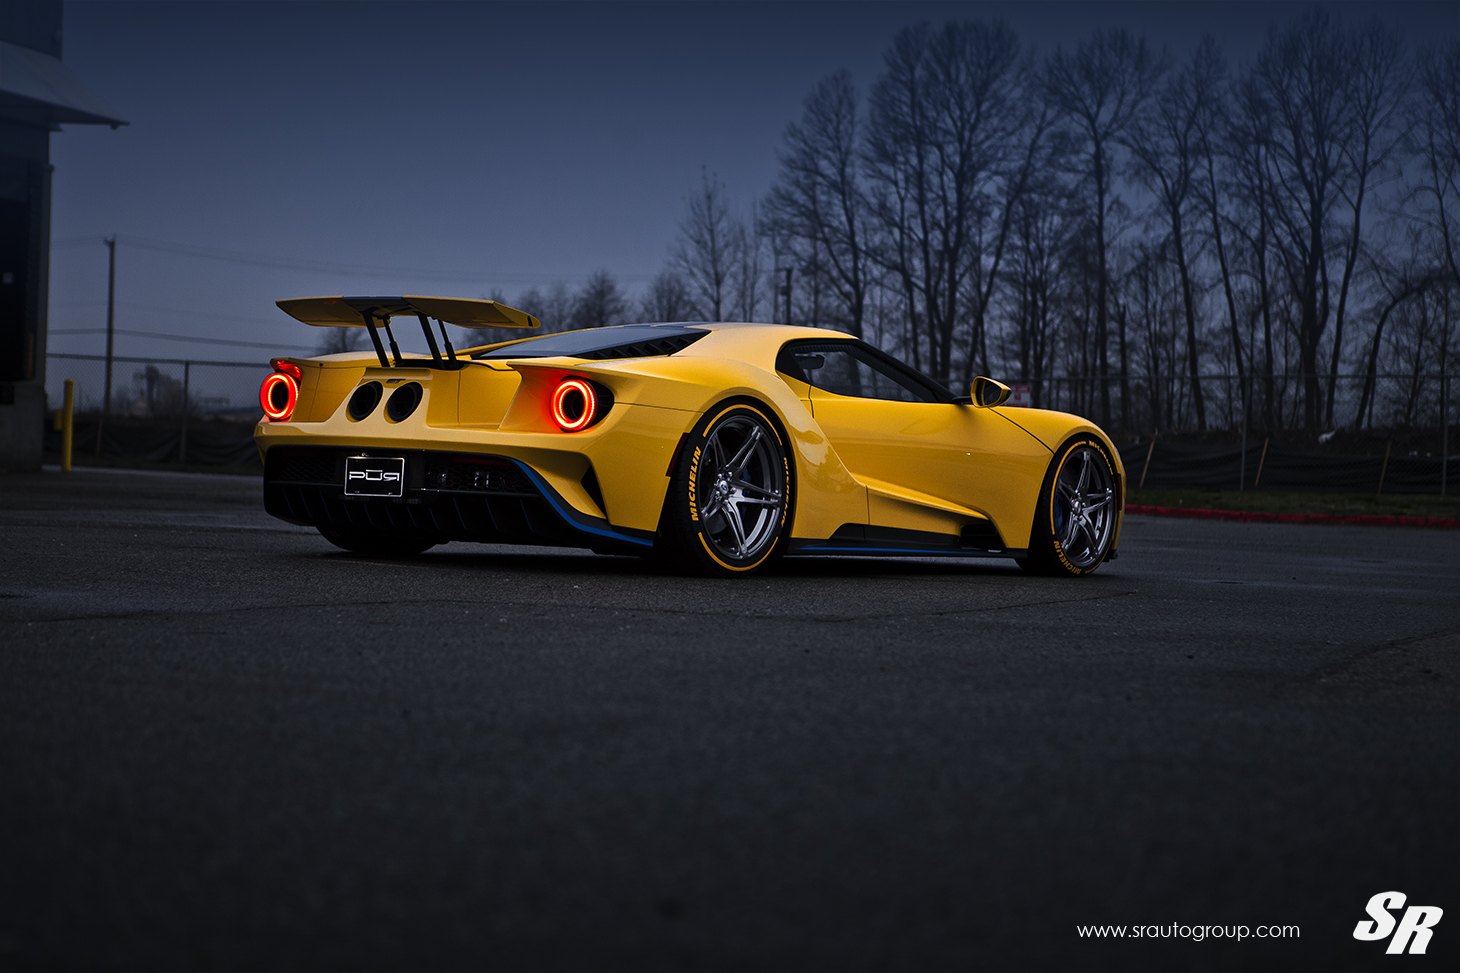 Aftermarket Side Skirts on Yellow Ford GT - Photo by SR Auto Group